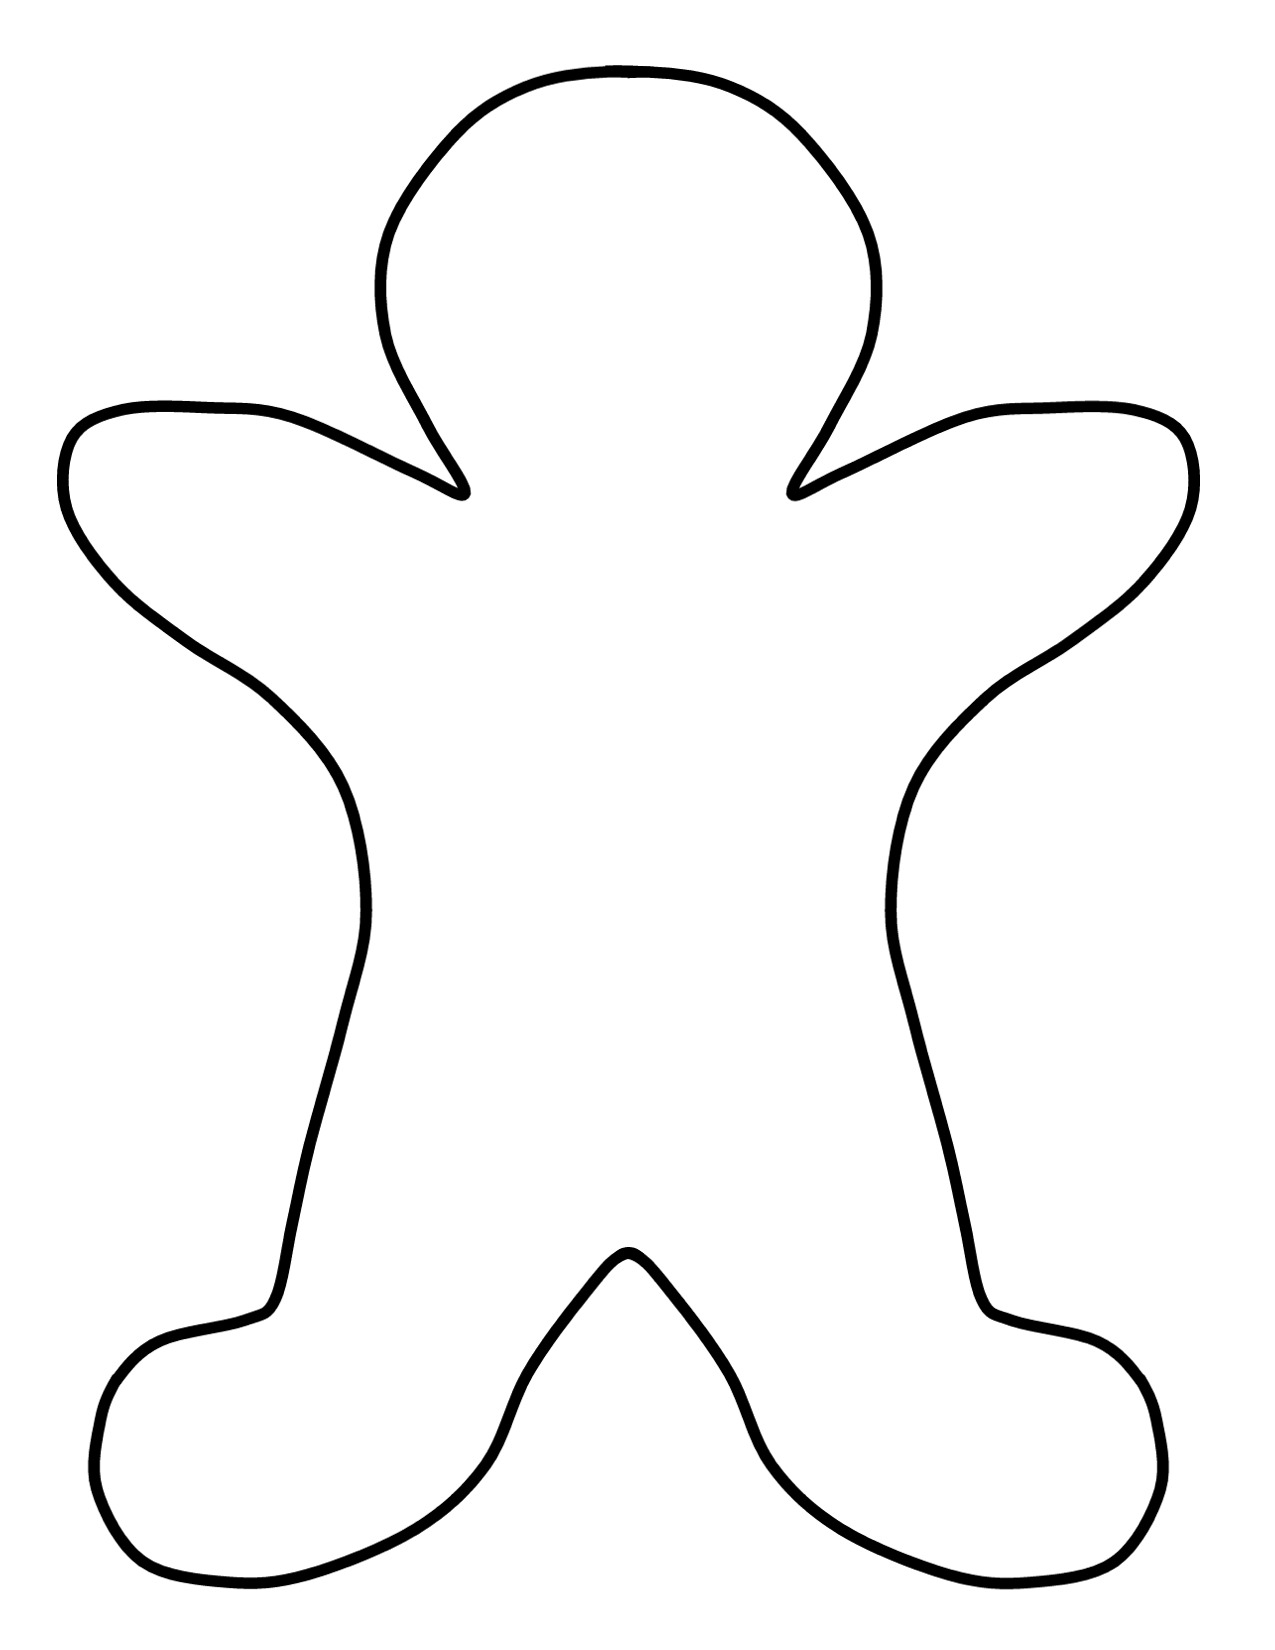 male clipart male outline